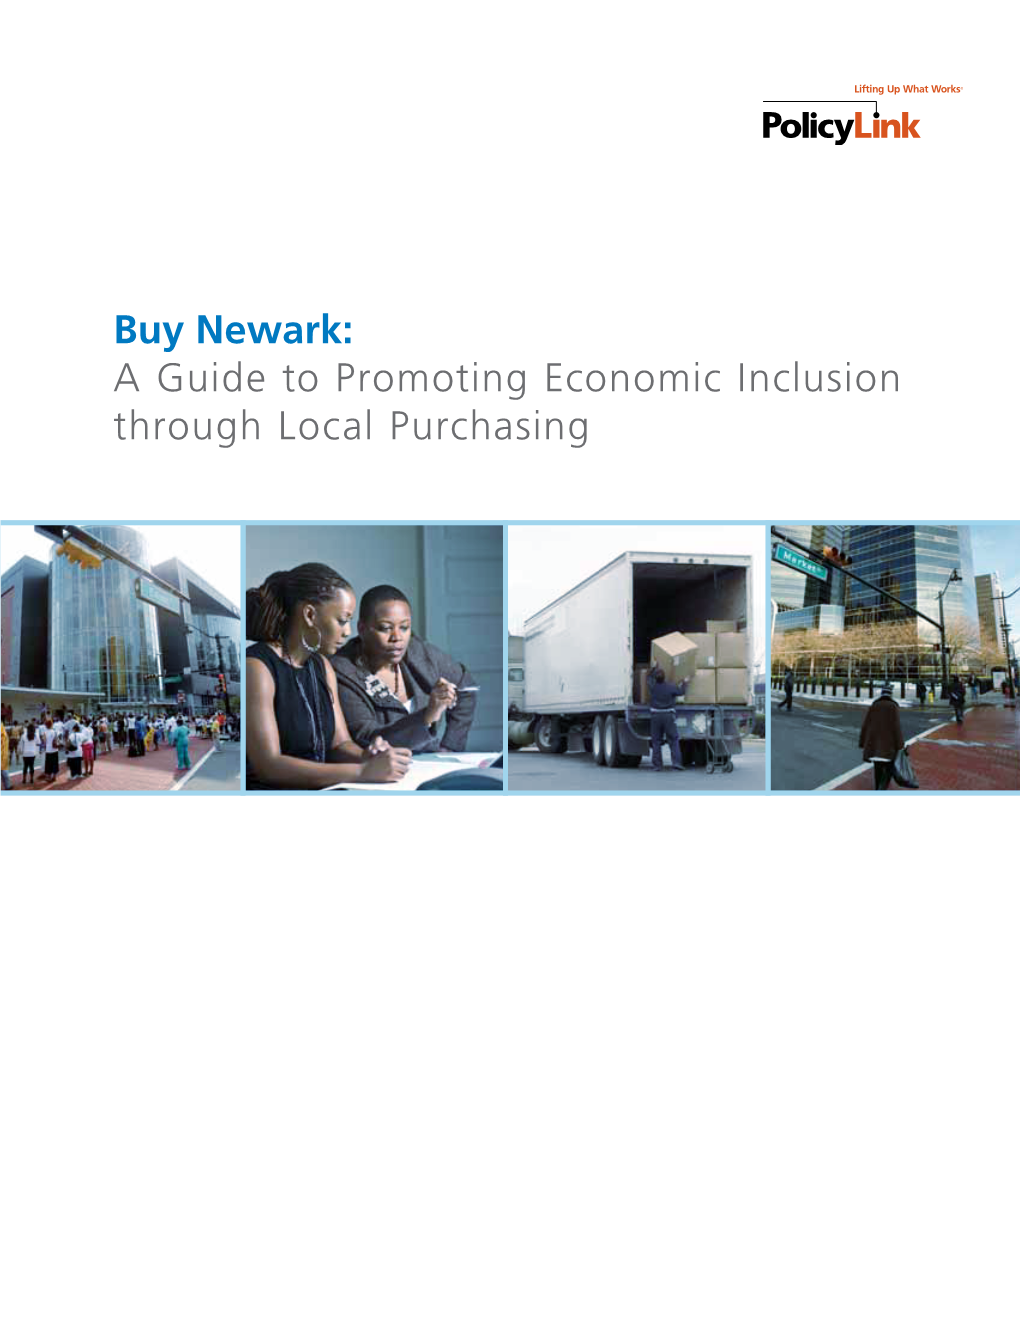 Buy Newark: a Guide to Promoting Economic Inclusion Through Local Purchasing